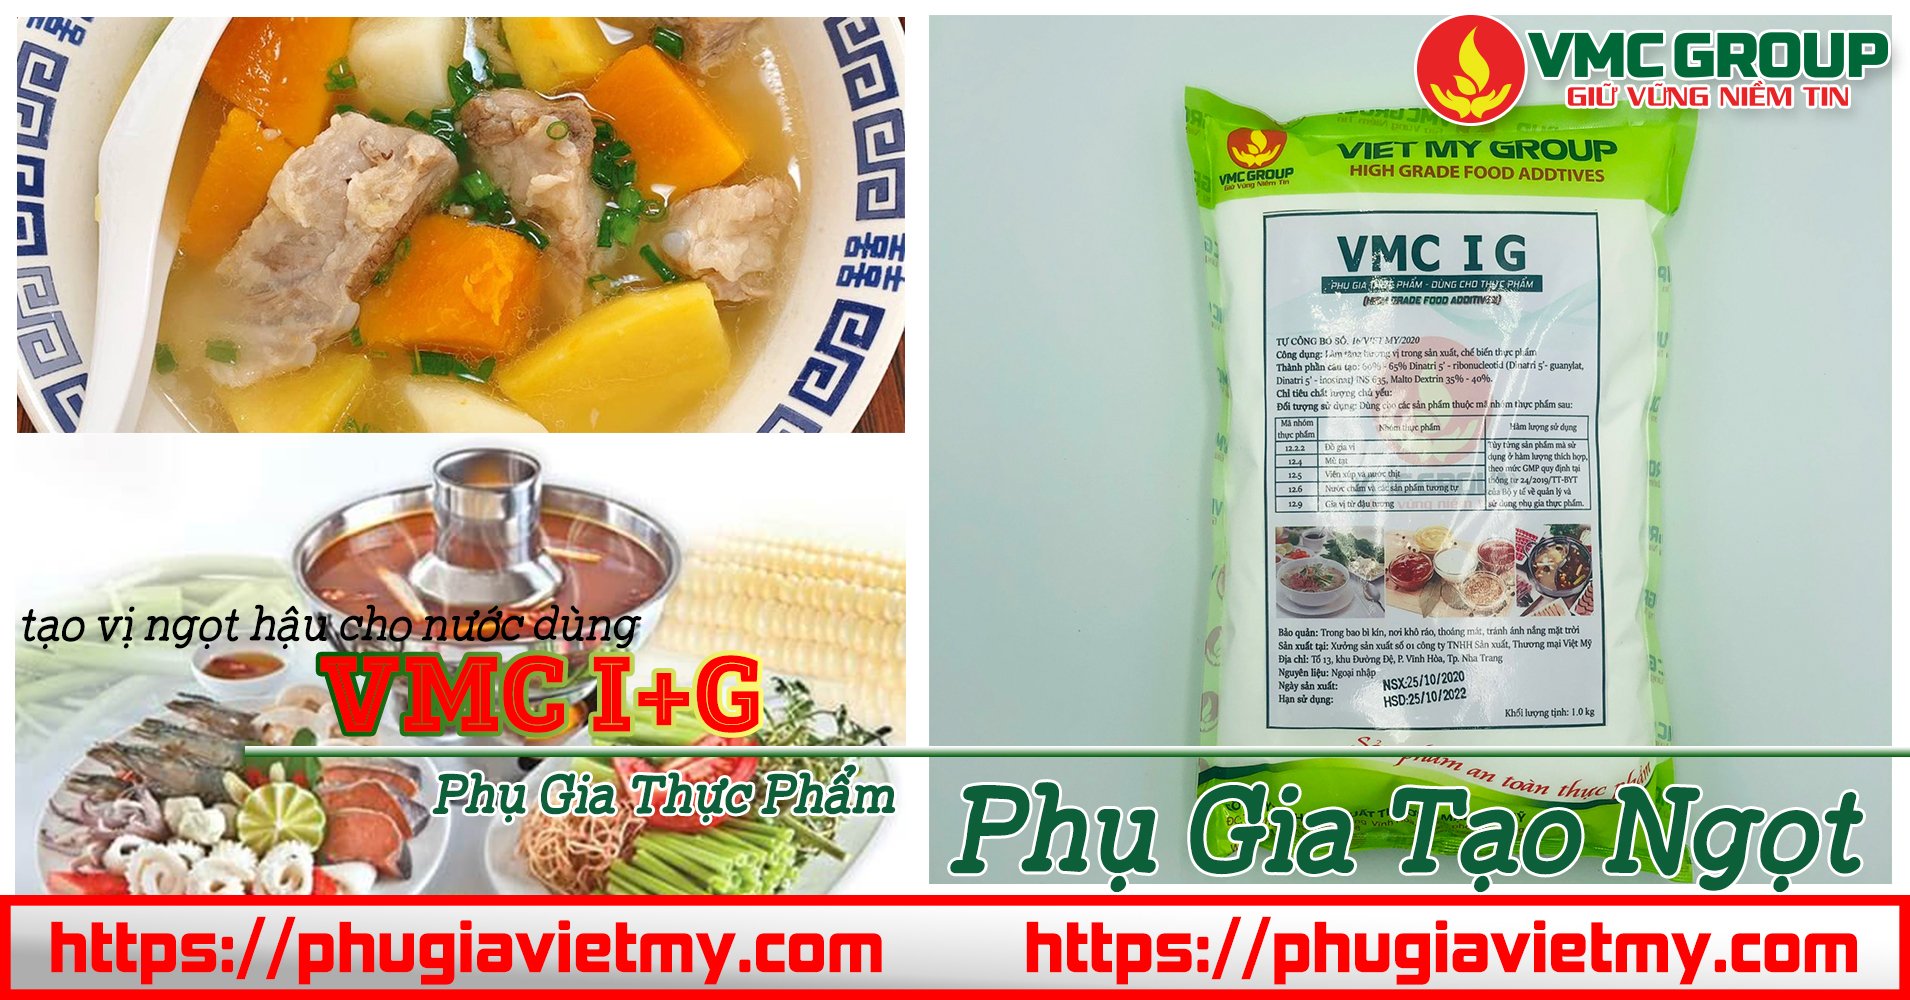 vmc-ig-dung-cho-nuoc-dung-gio-cha-thay-the-my-chinh-1